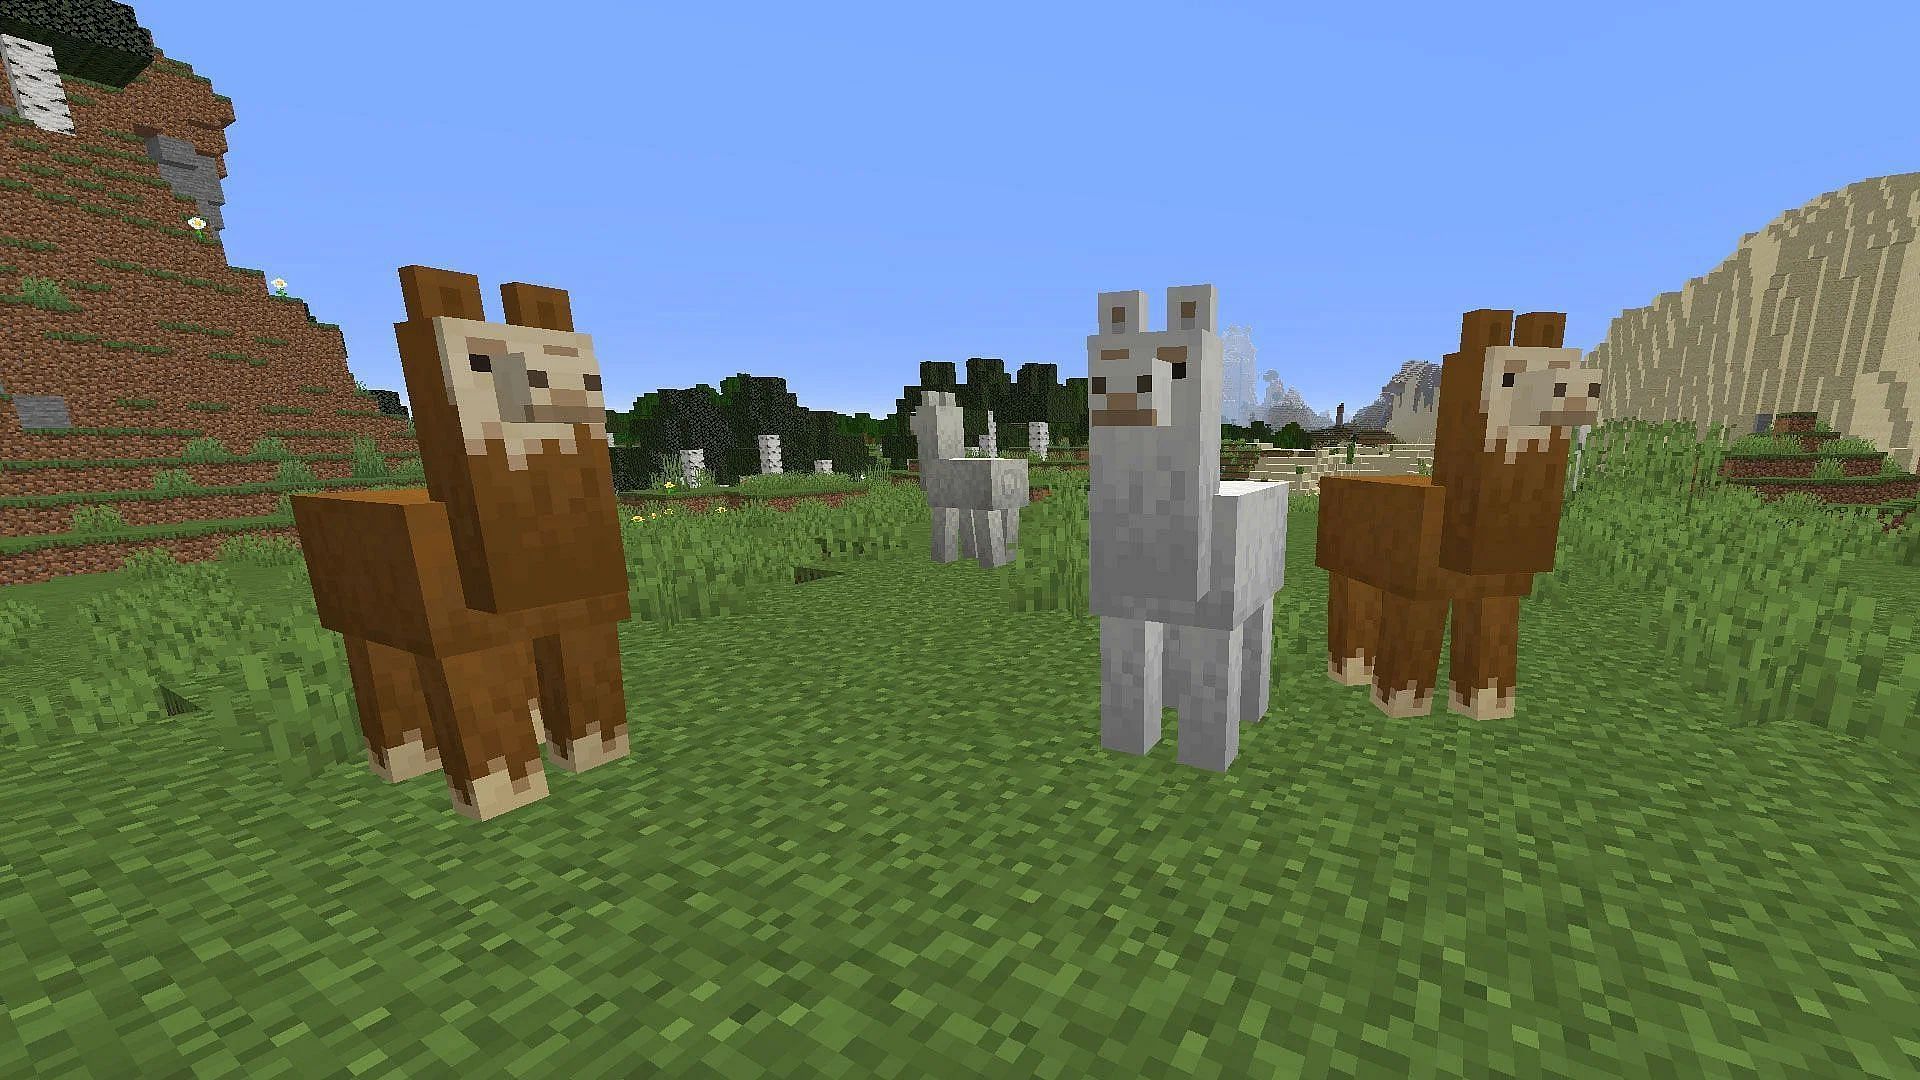 Llamas can only carry items on their backs in Minecraft 1.19 (Image via Mojang)